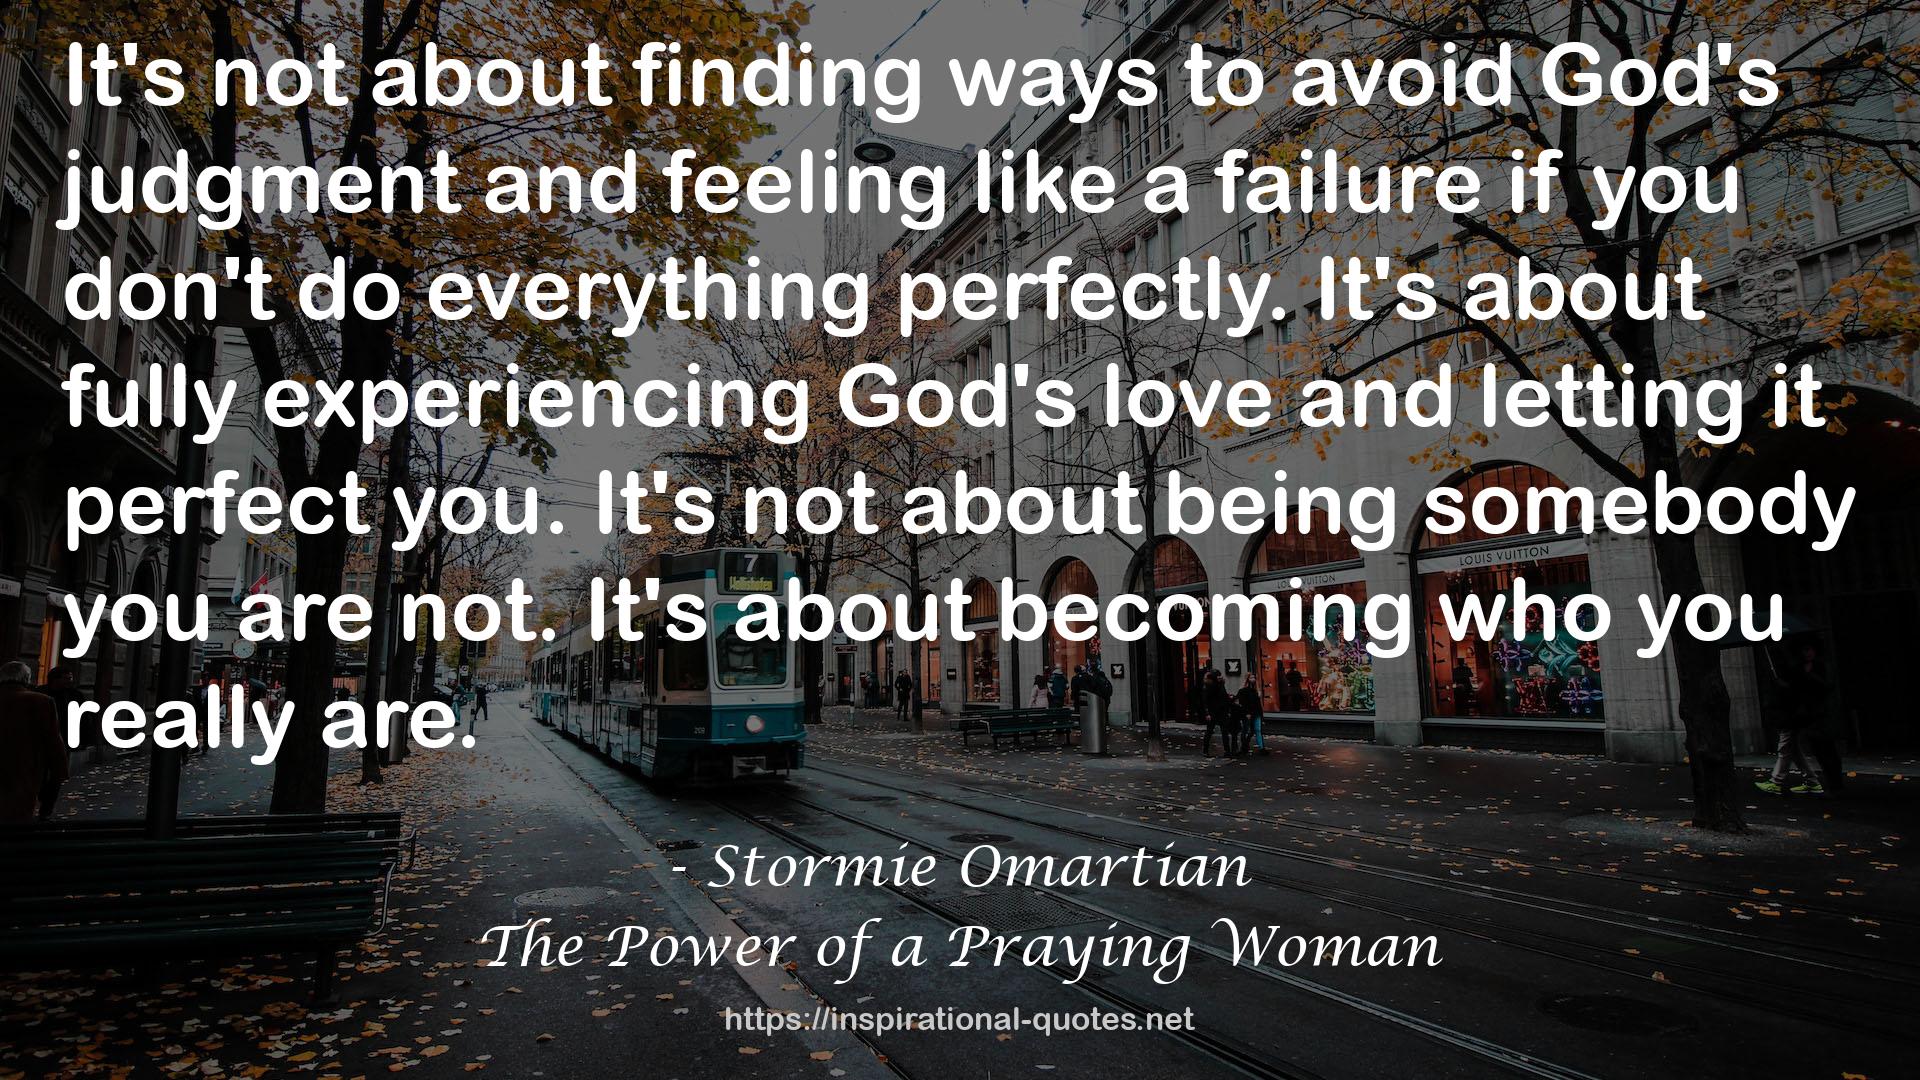 The Power of a Praying Woman QUOTES